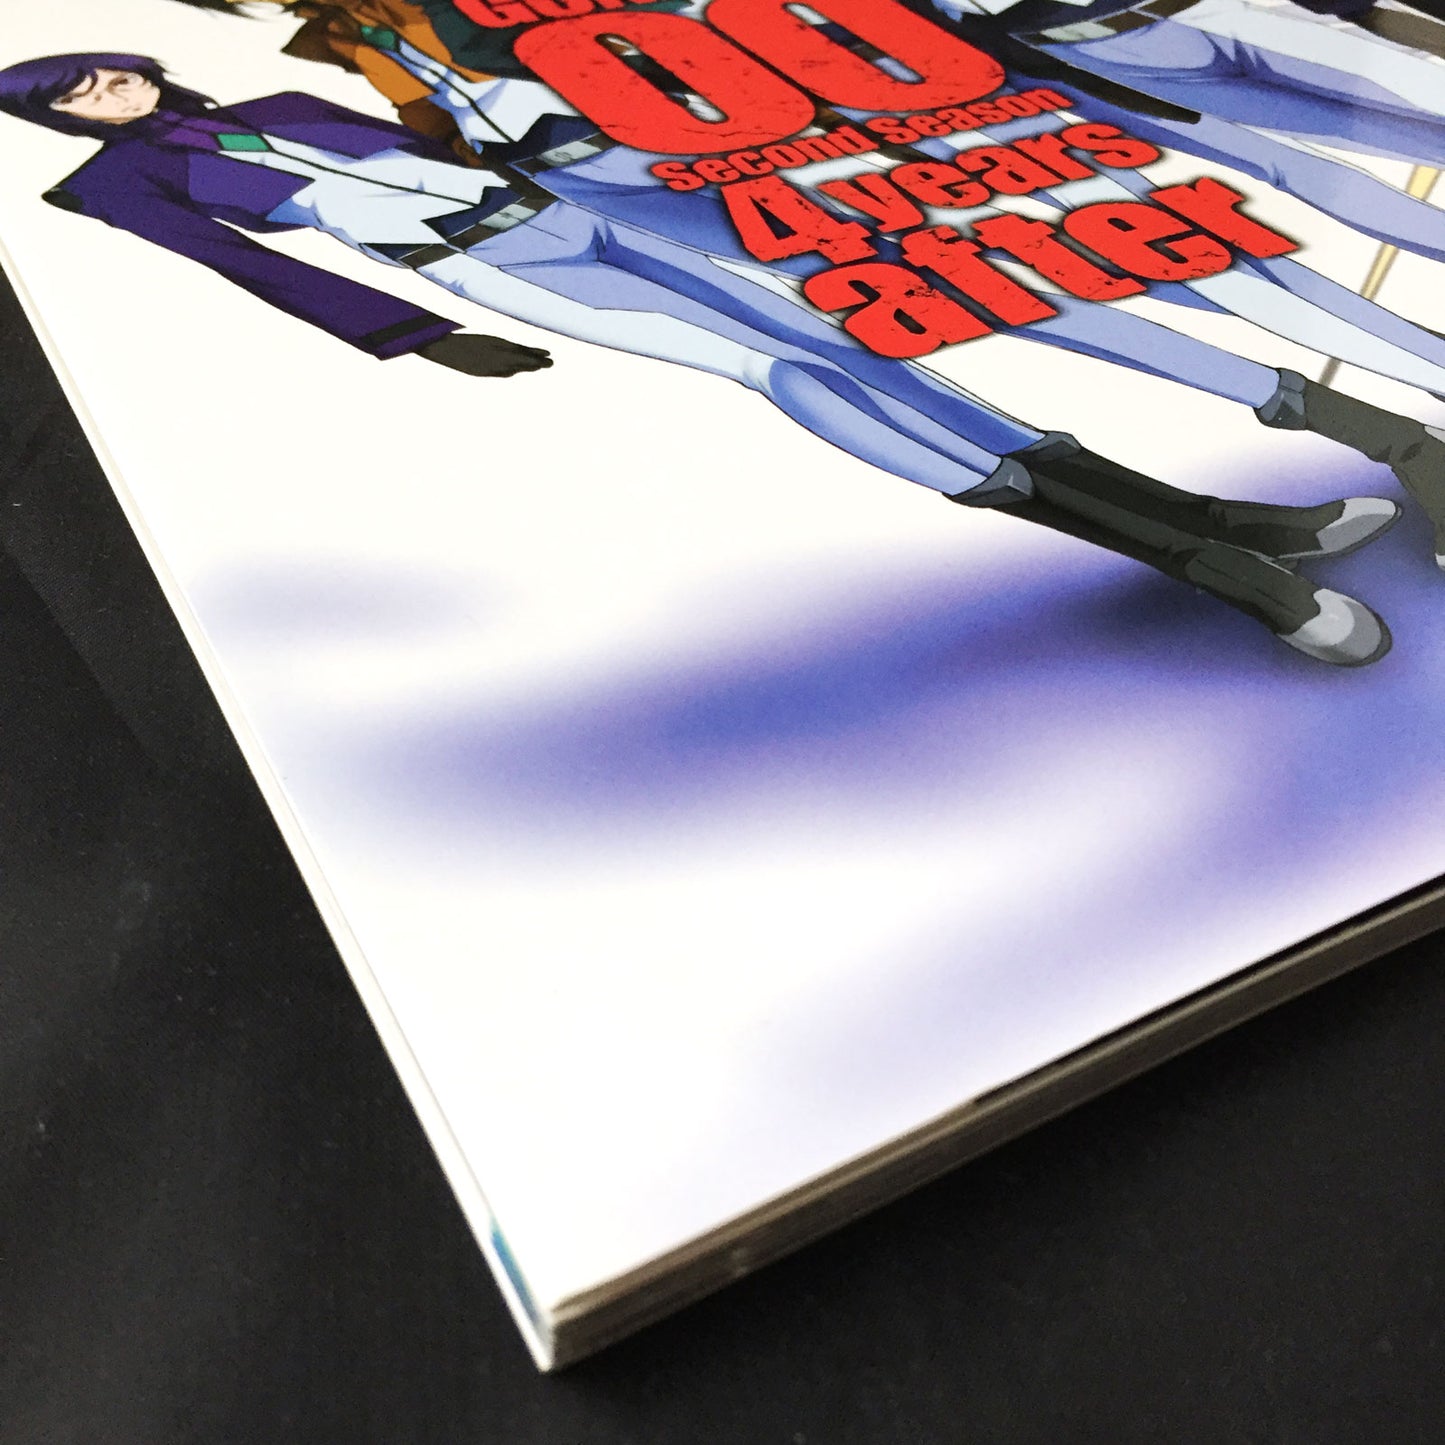 Mobile Suit Gundam 00 Second Season 4 years after Guide Book